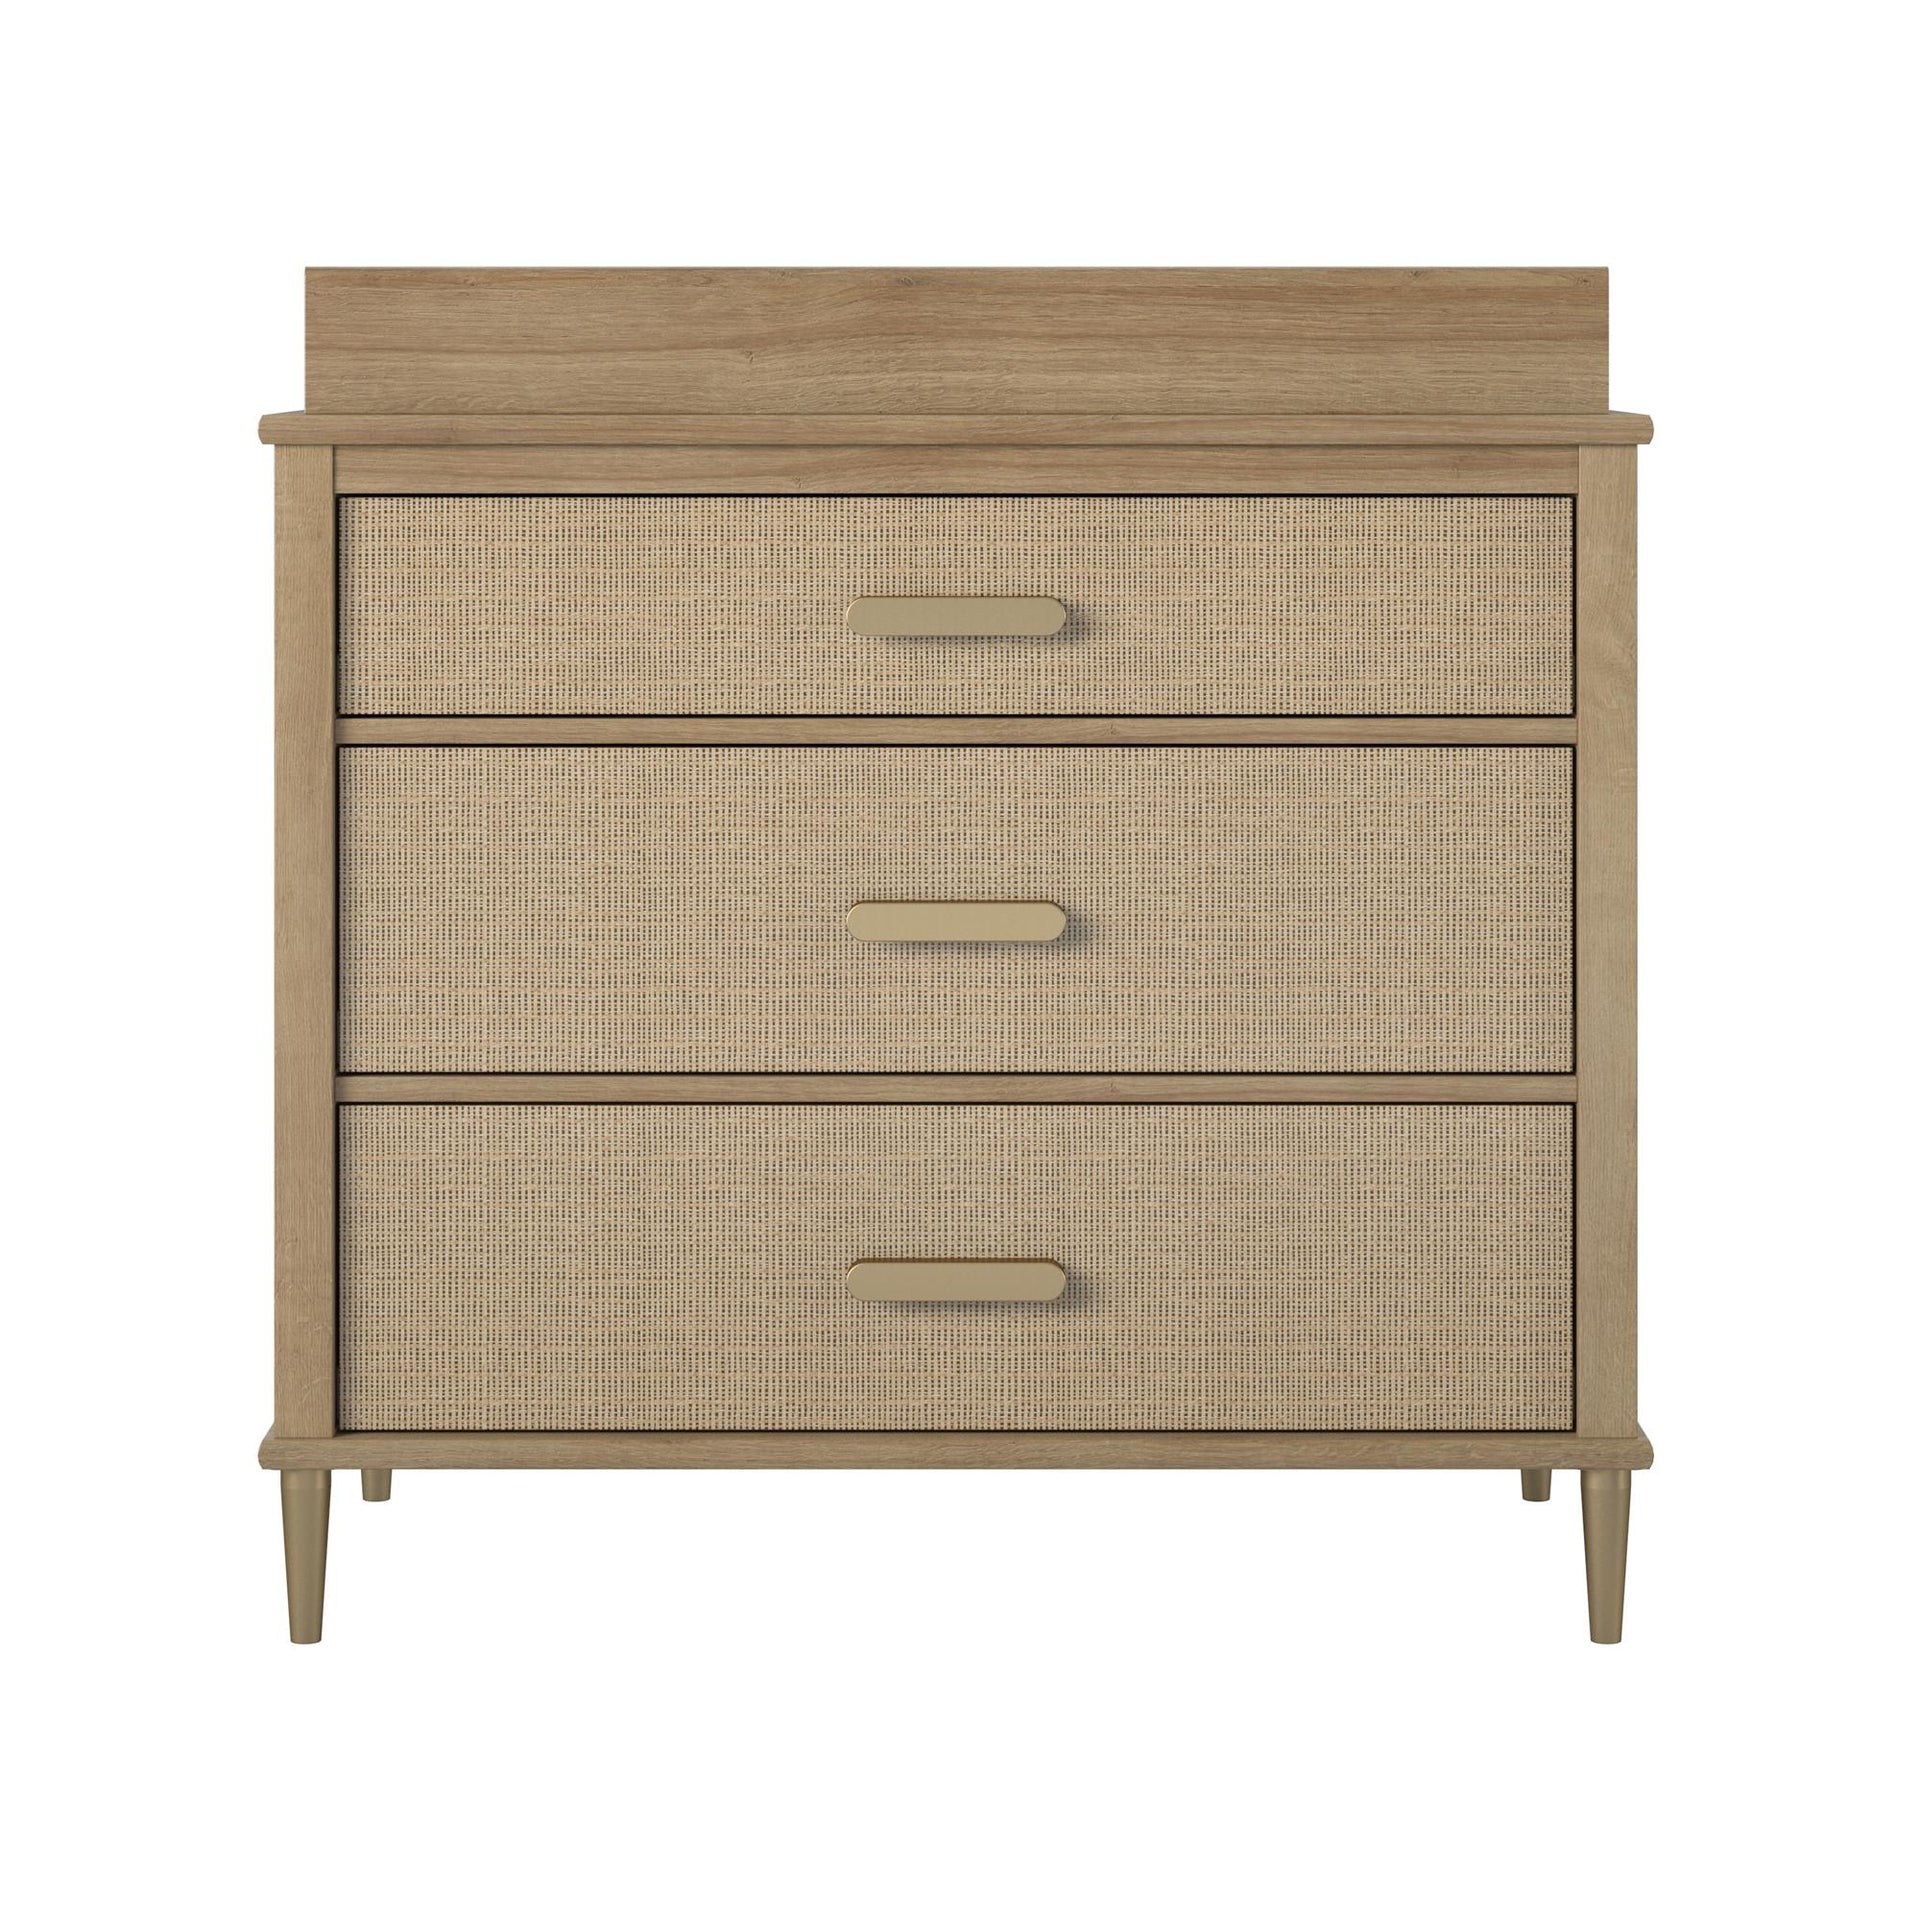 Shiloh 3 Drawer Convertible Dresser & Changing Table - Natural